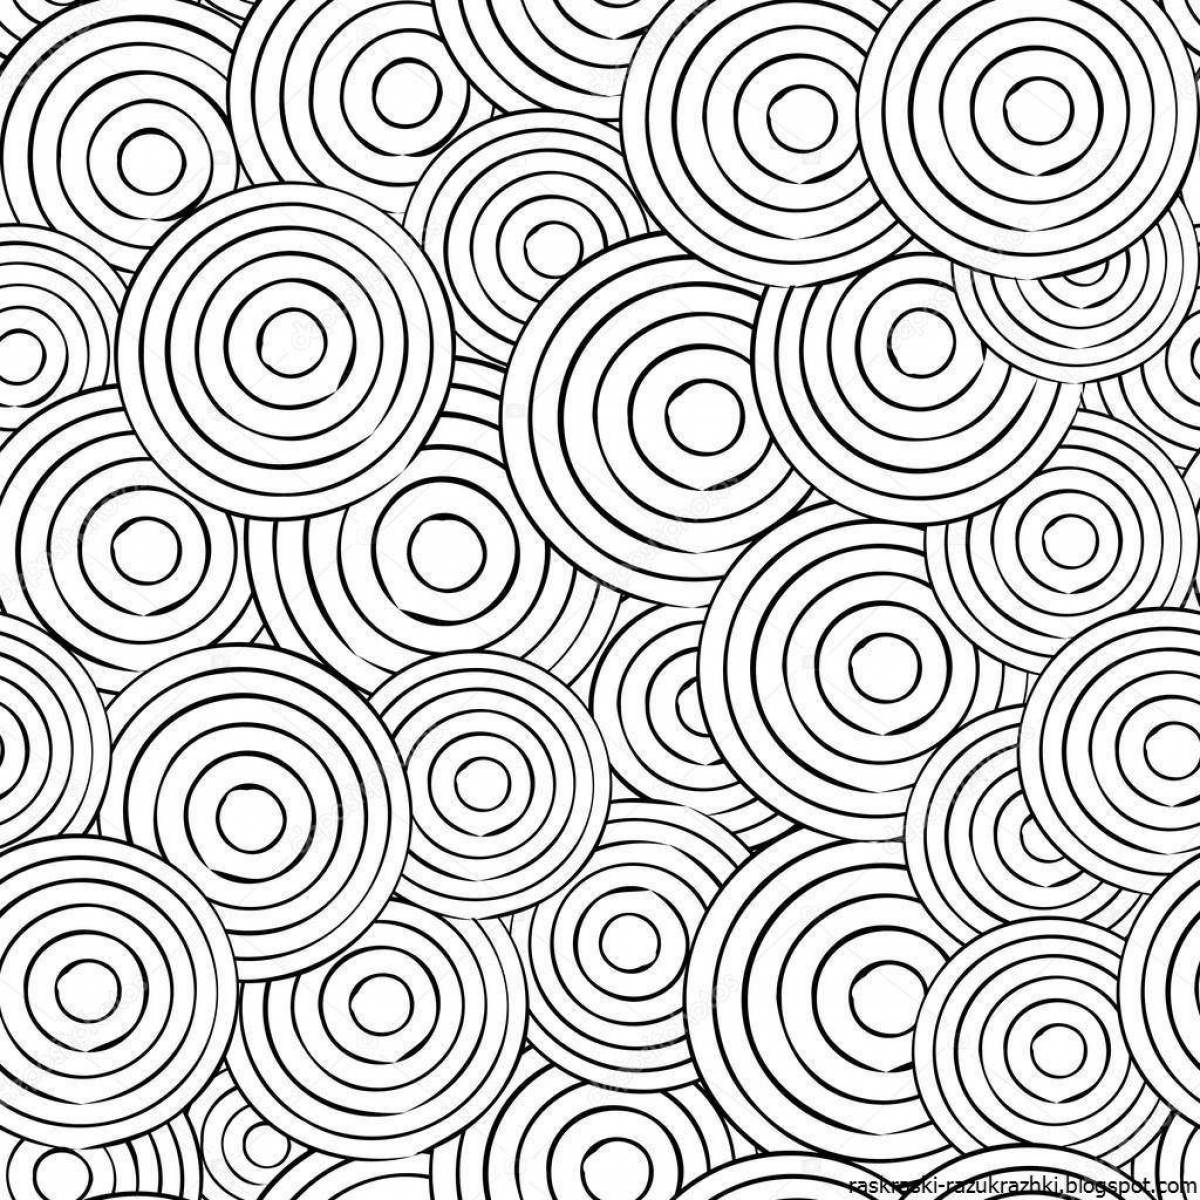 Mystical coloring page background